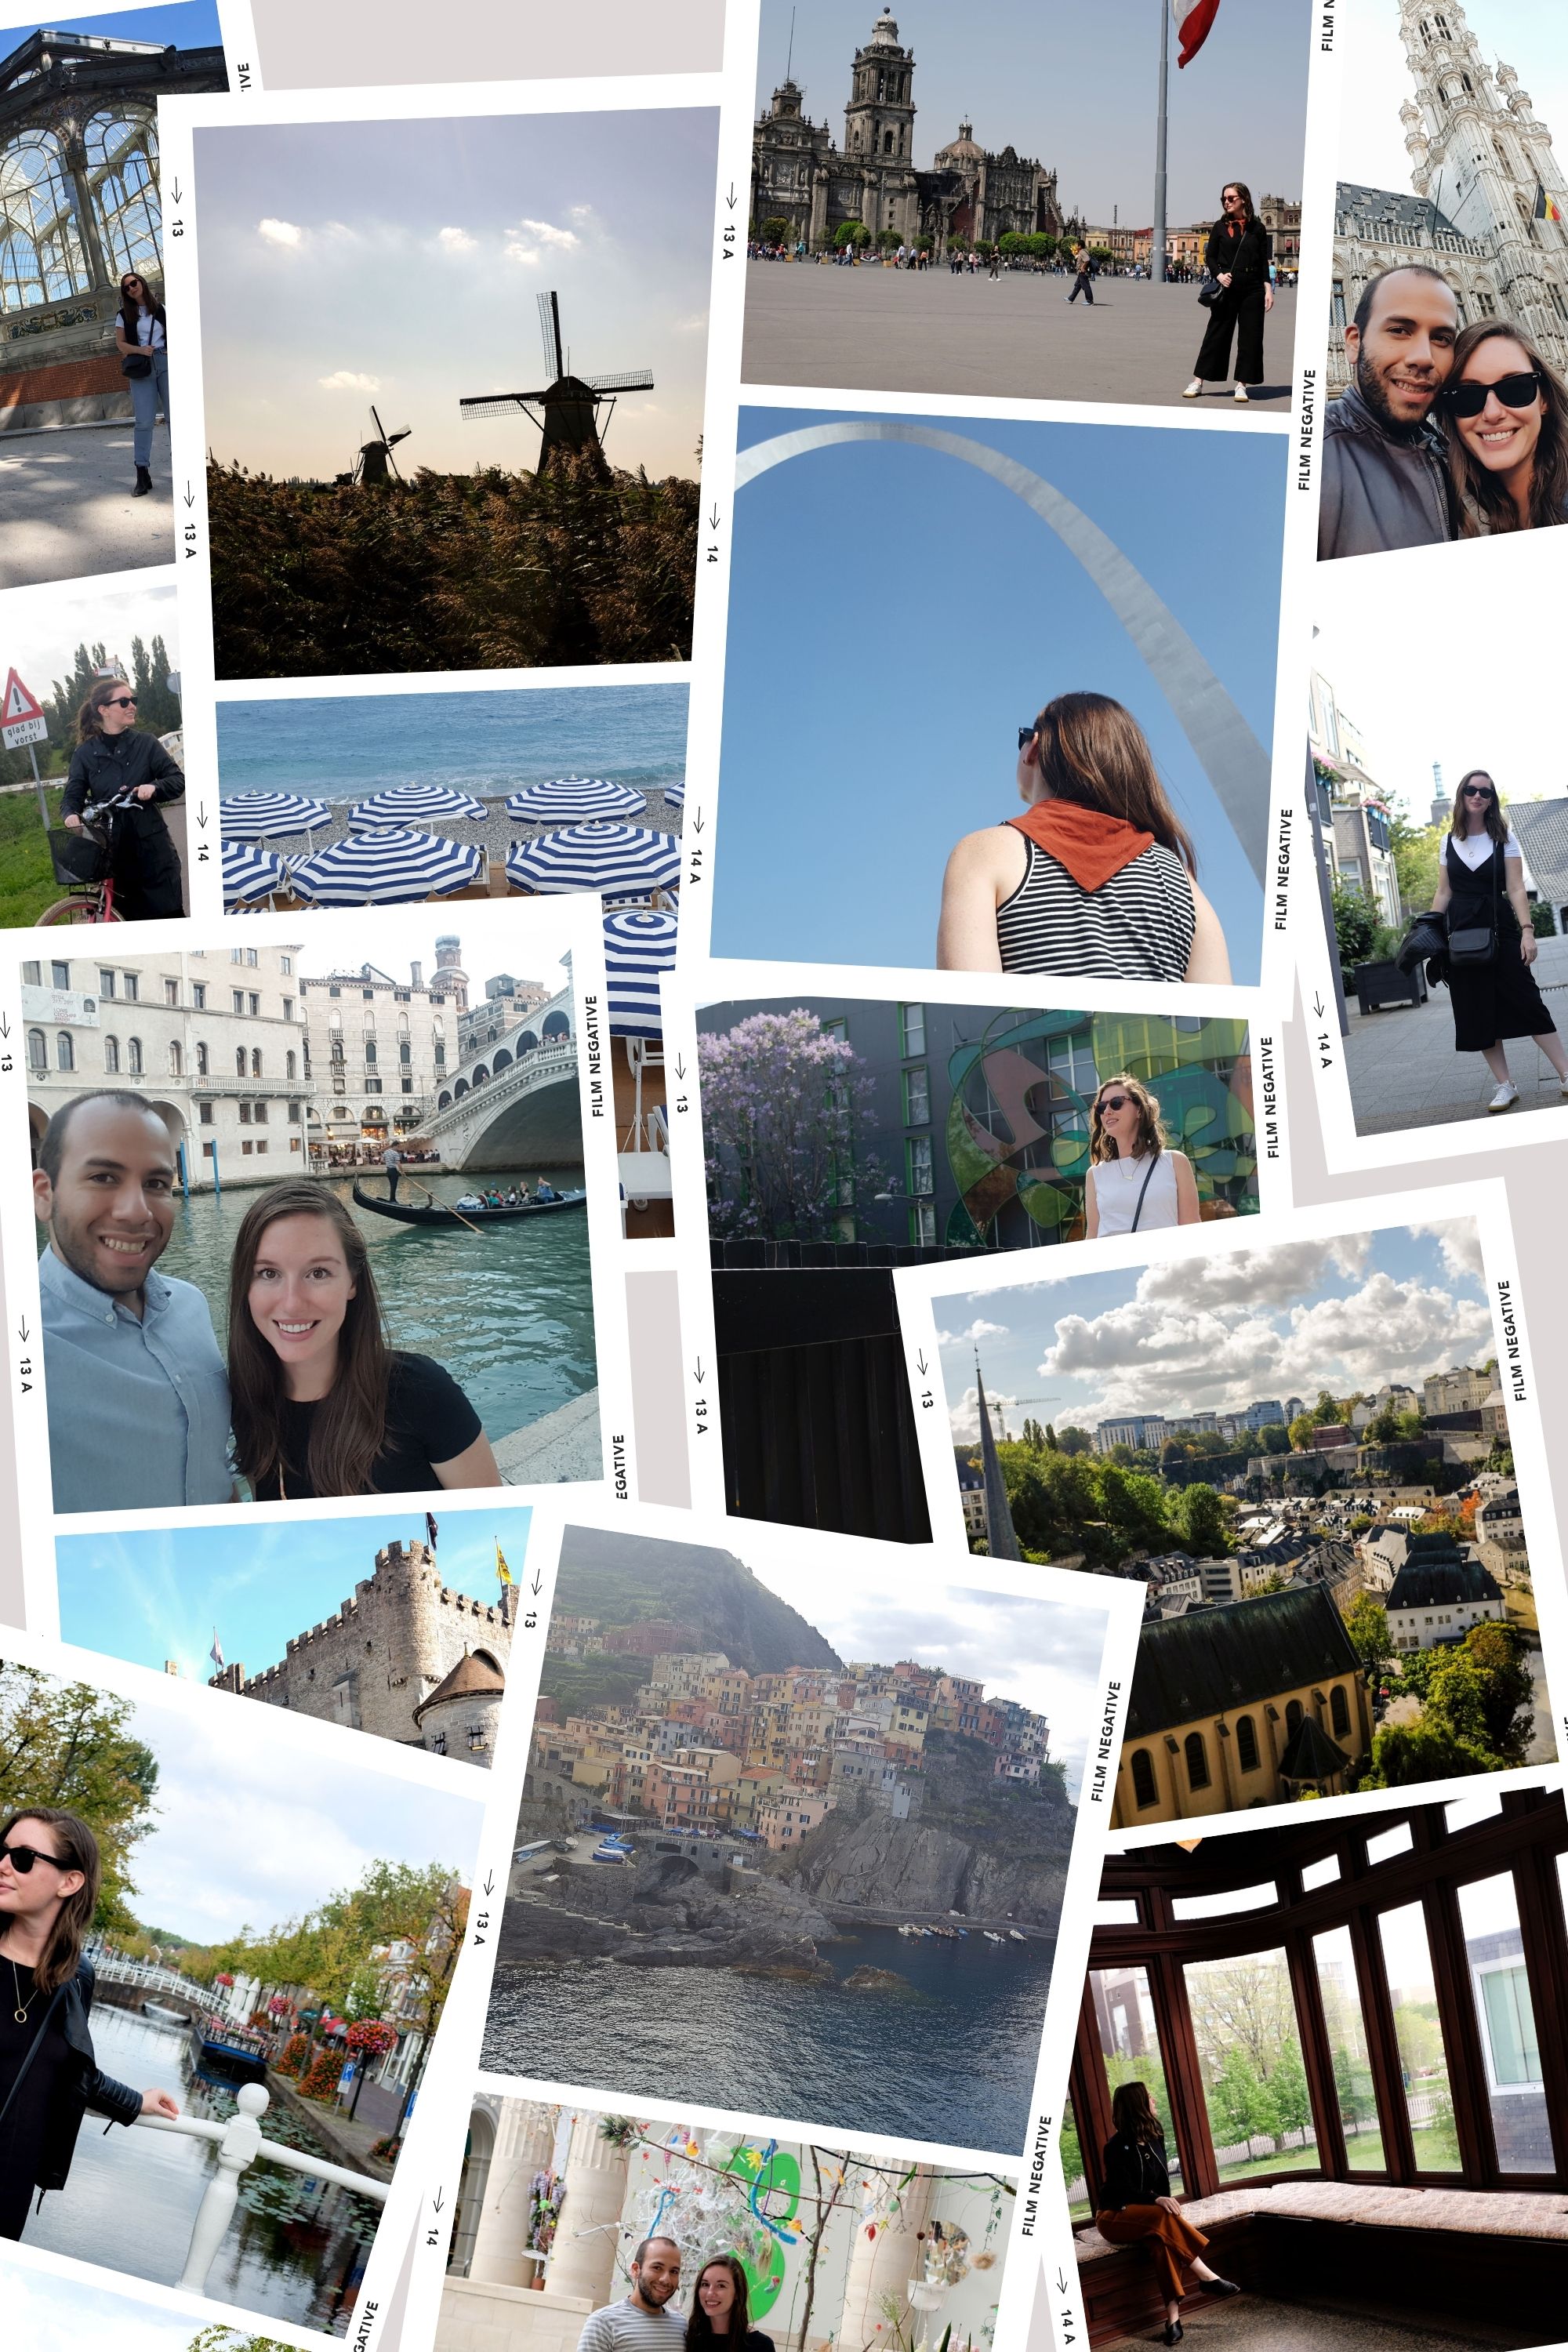 Collage of travel photos from places like Venice, St. Louis, Amsterdam, Nice, Luxembourg, etc. Alyssa and Michael appear in some of the travel photos